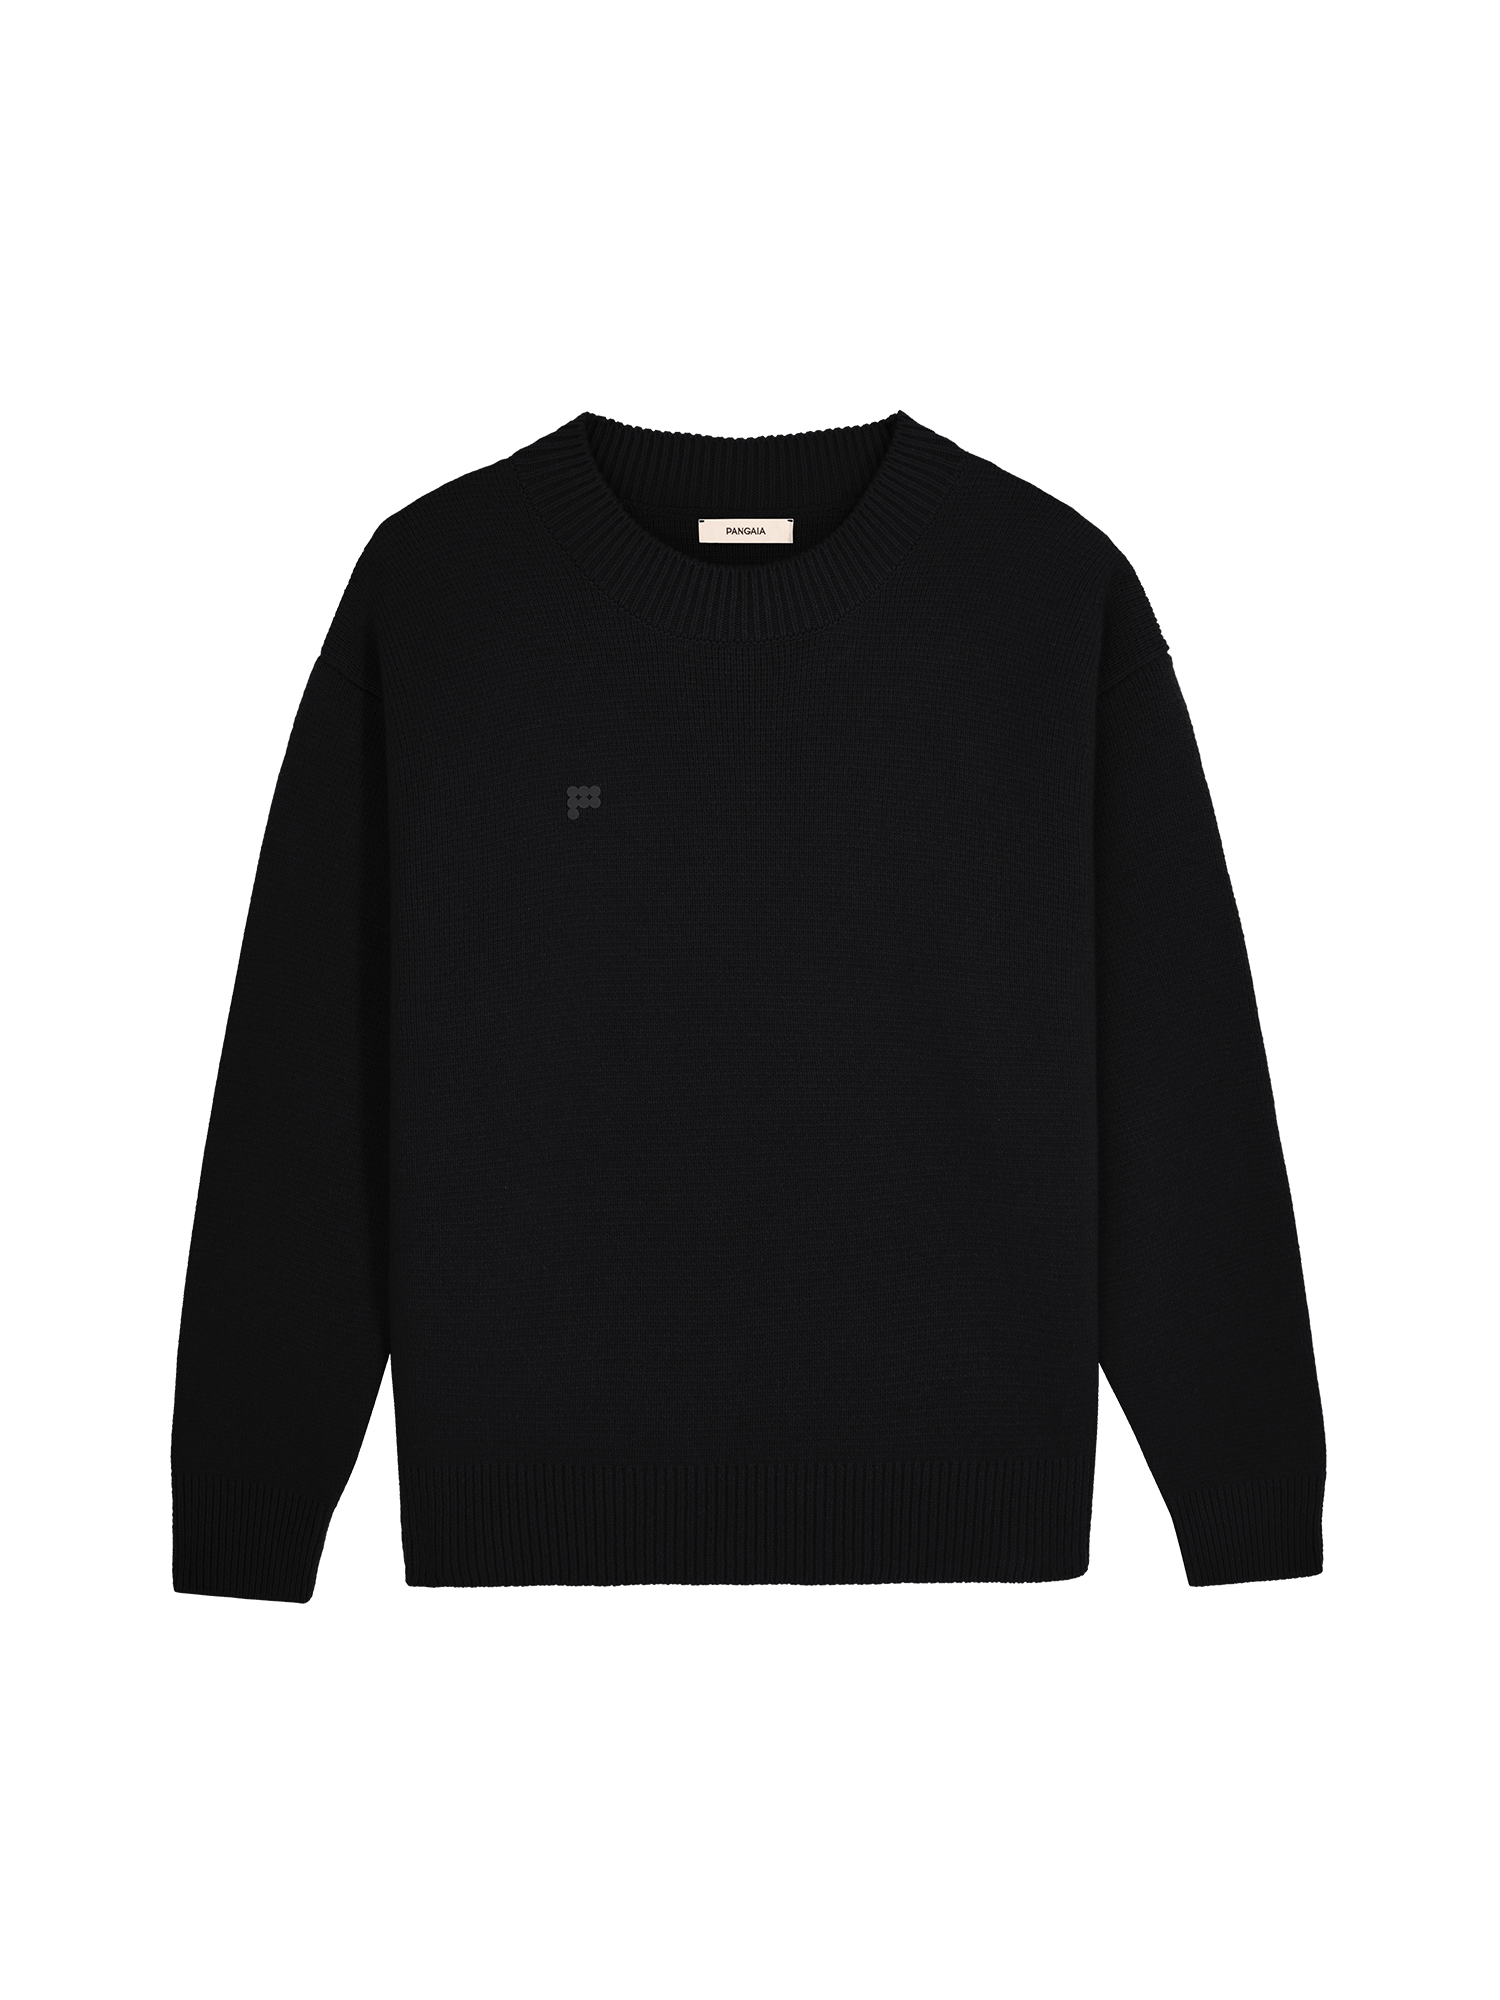 Womens_Recycled_Cashmere_Knit_Crew_Neck_Sweater_Black-packshot-3